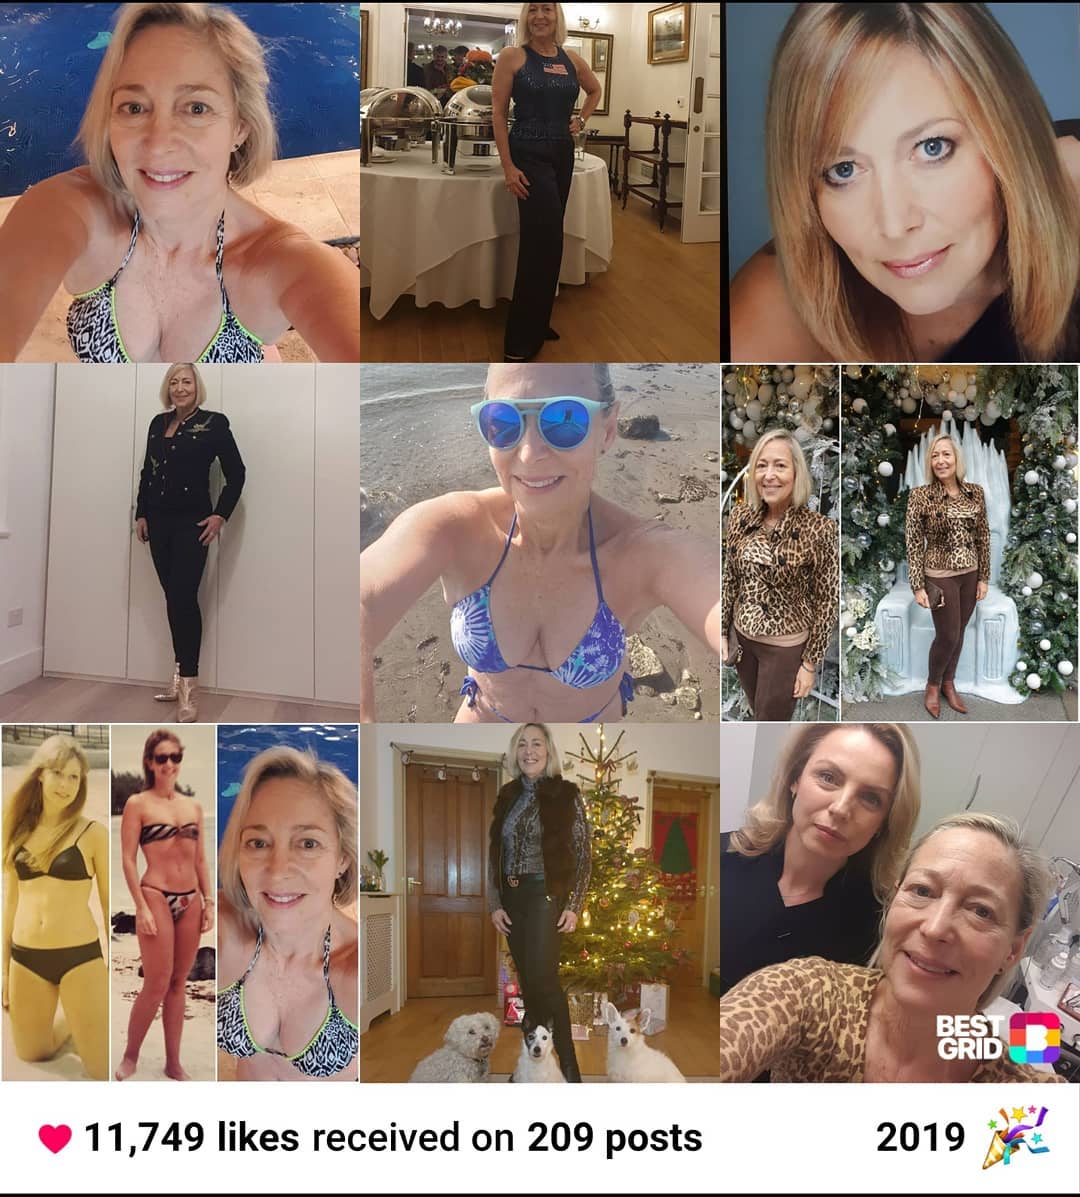 Happy new year 
All unfiltered pix.
My feed hopes to inspire, motivate and create a healthy lifestyle and body positivity for women of all ages. .
.
.
.
.